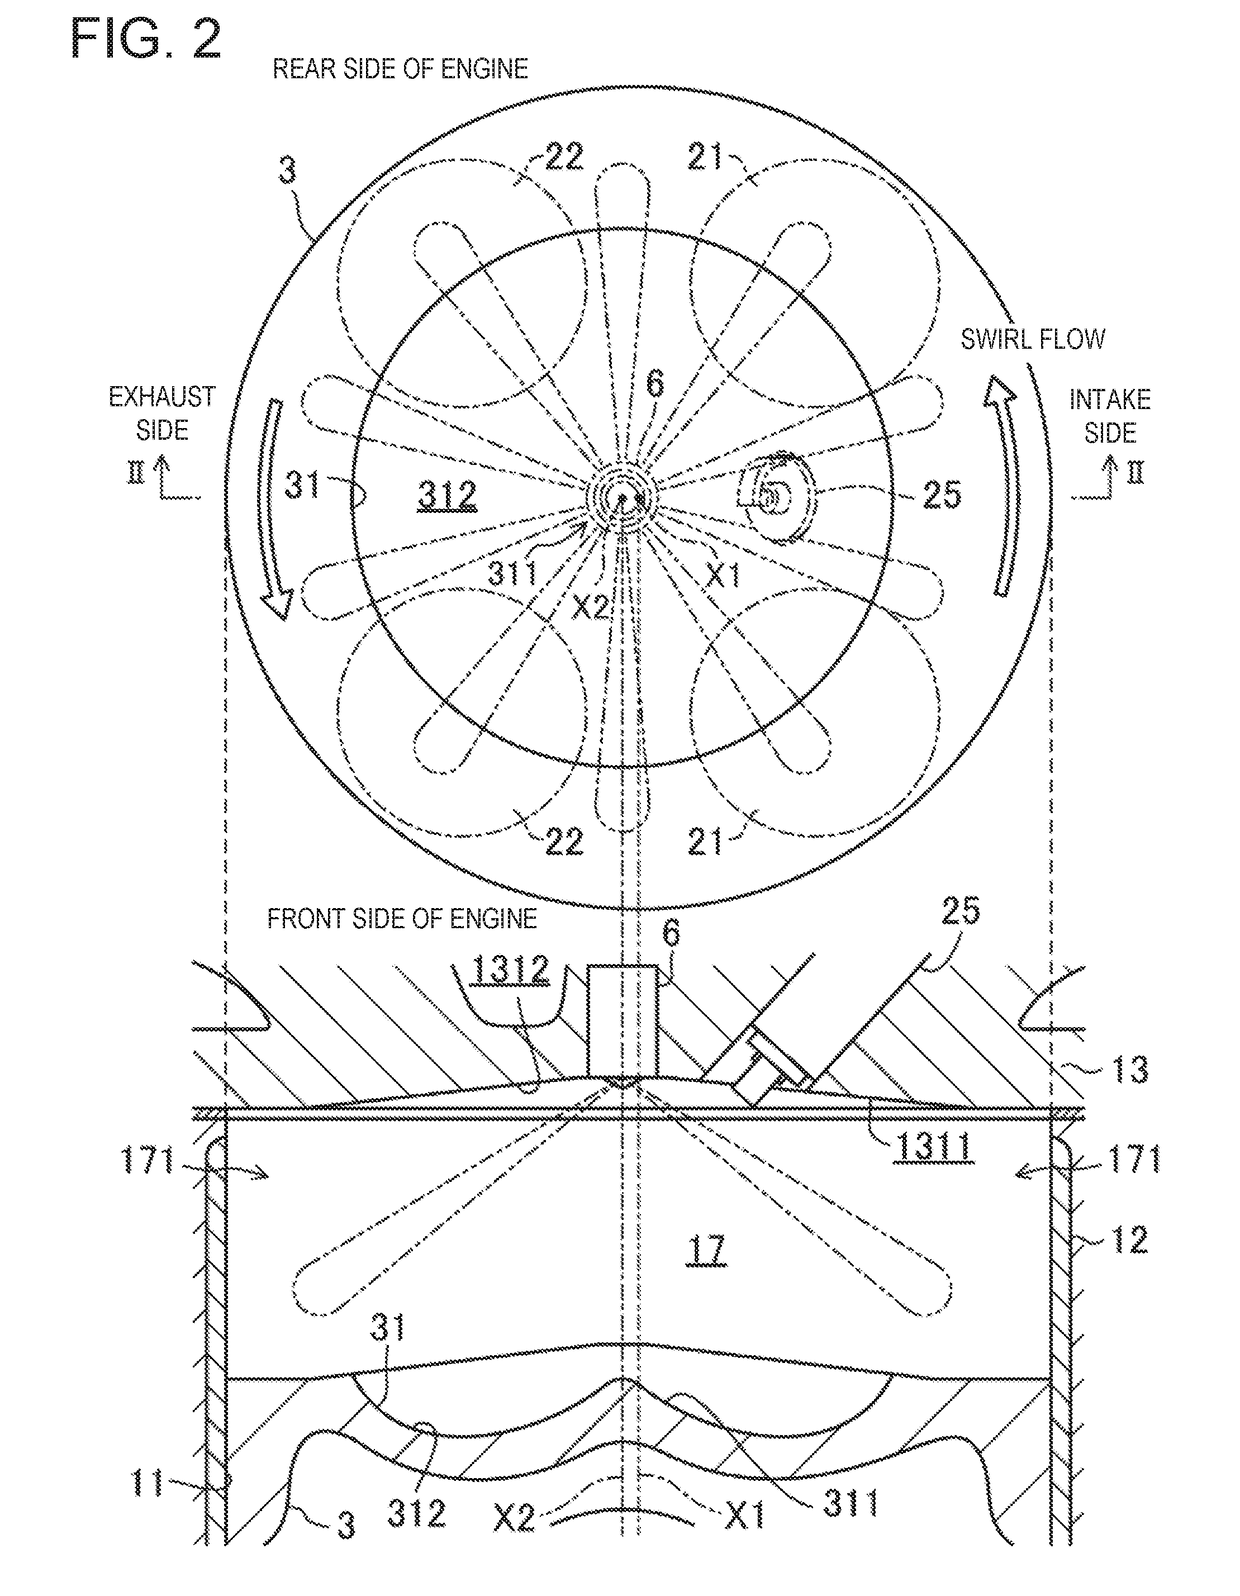 Control system for pre-mixture compression-ignition engine